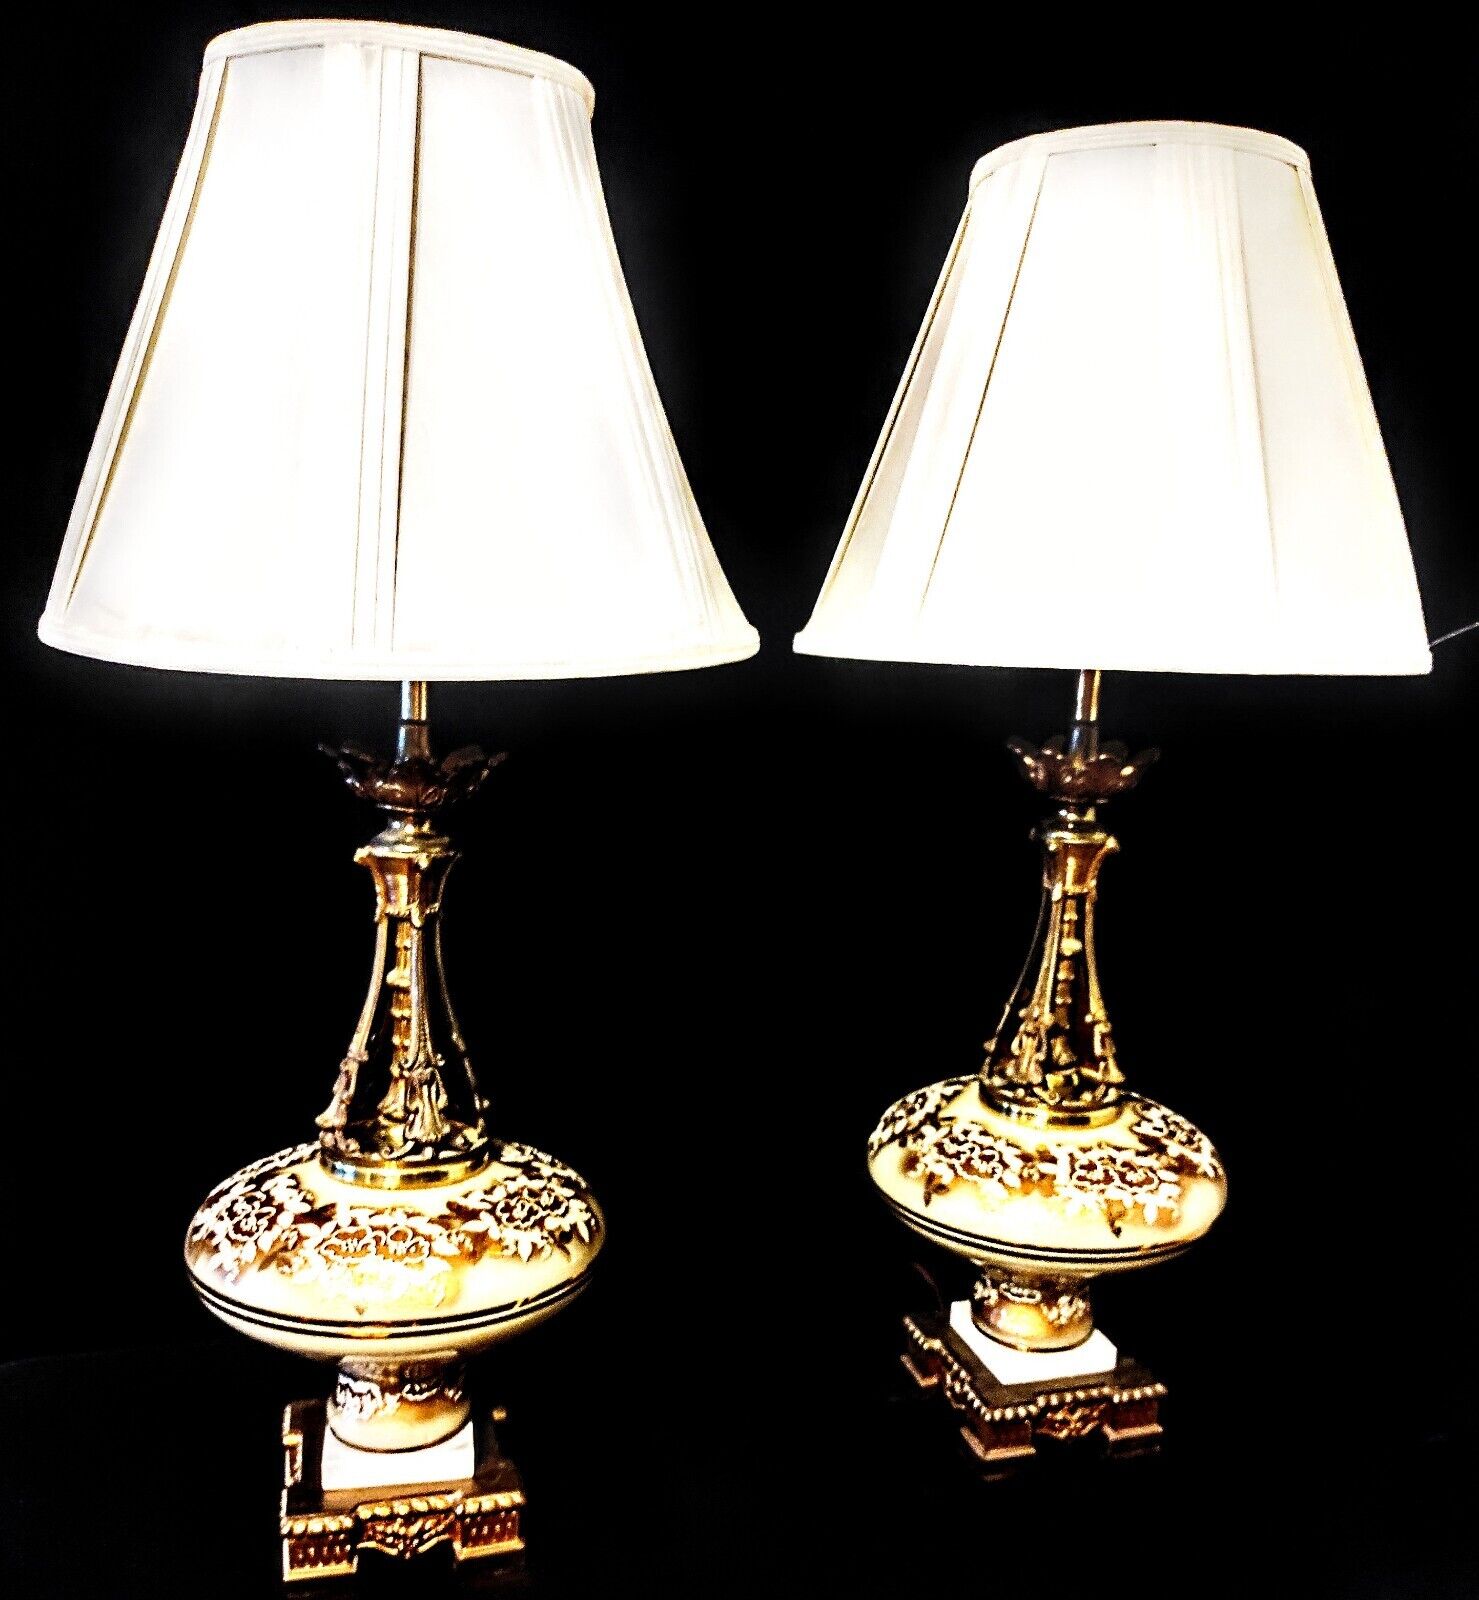 Set of 2 Massive Hollywood Regency Decorative Glass On Bronze Table Lamps